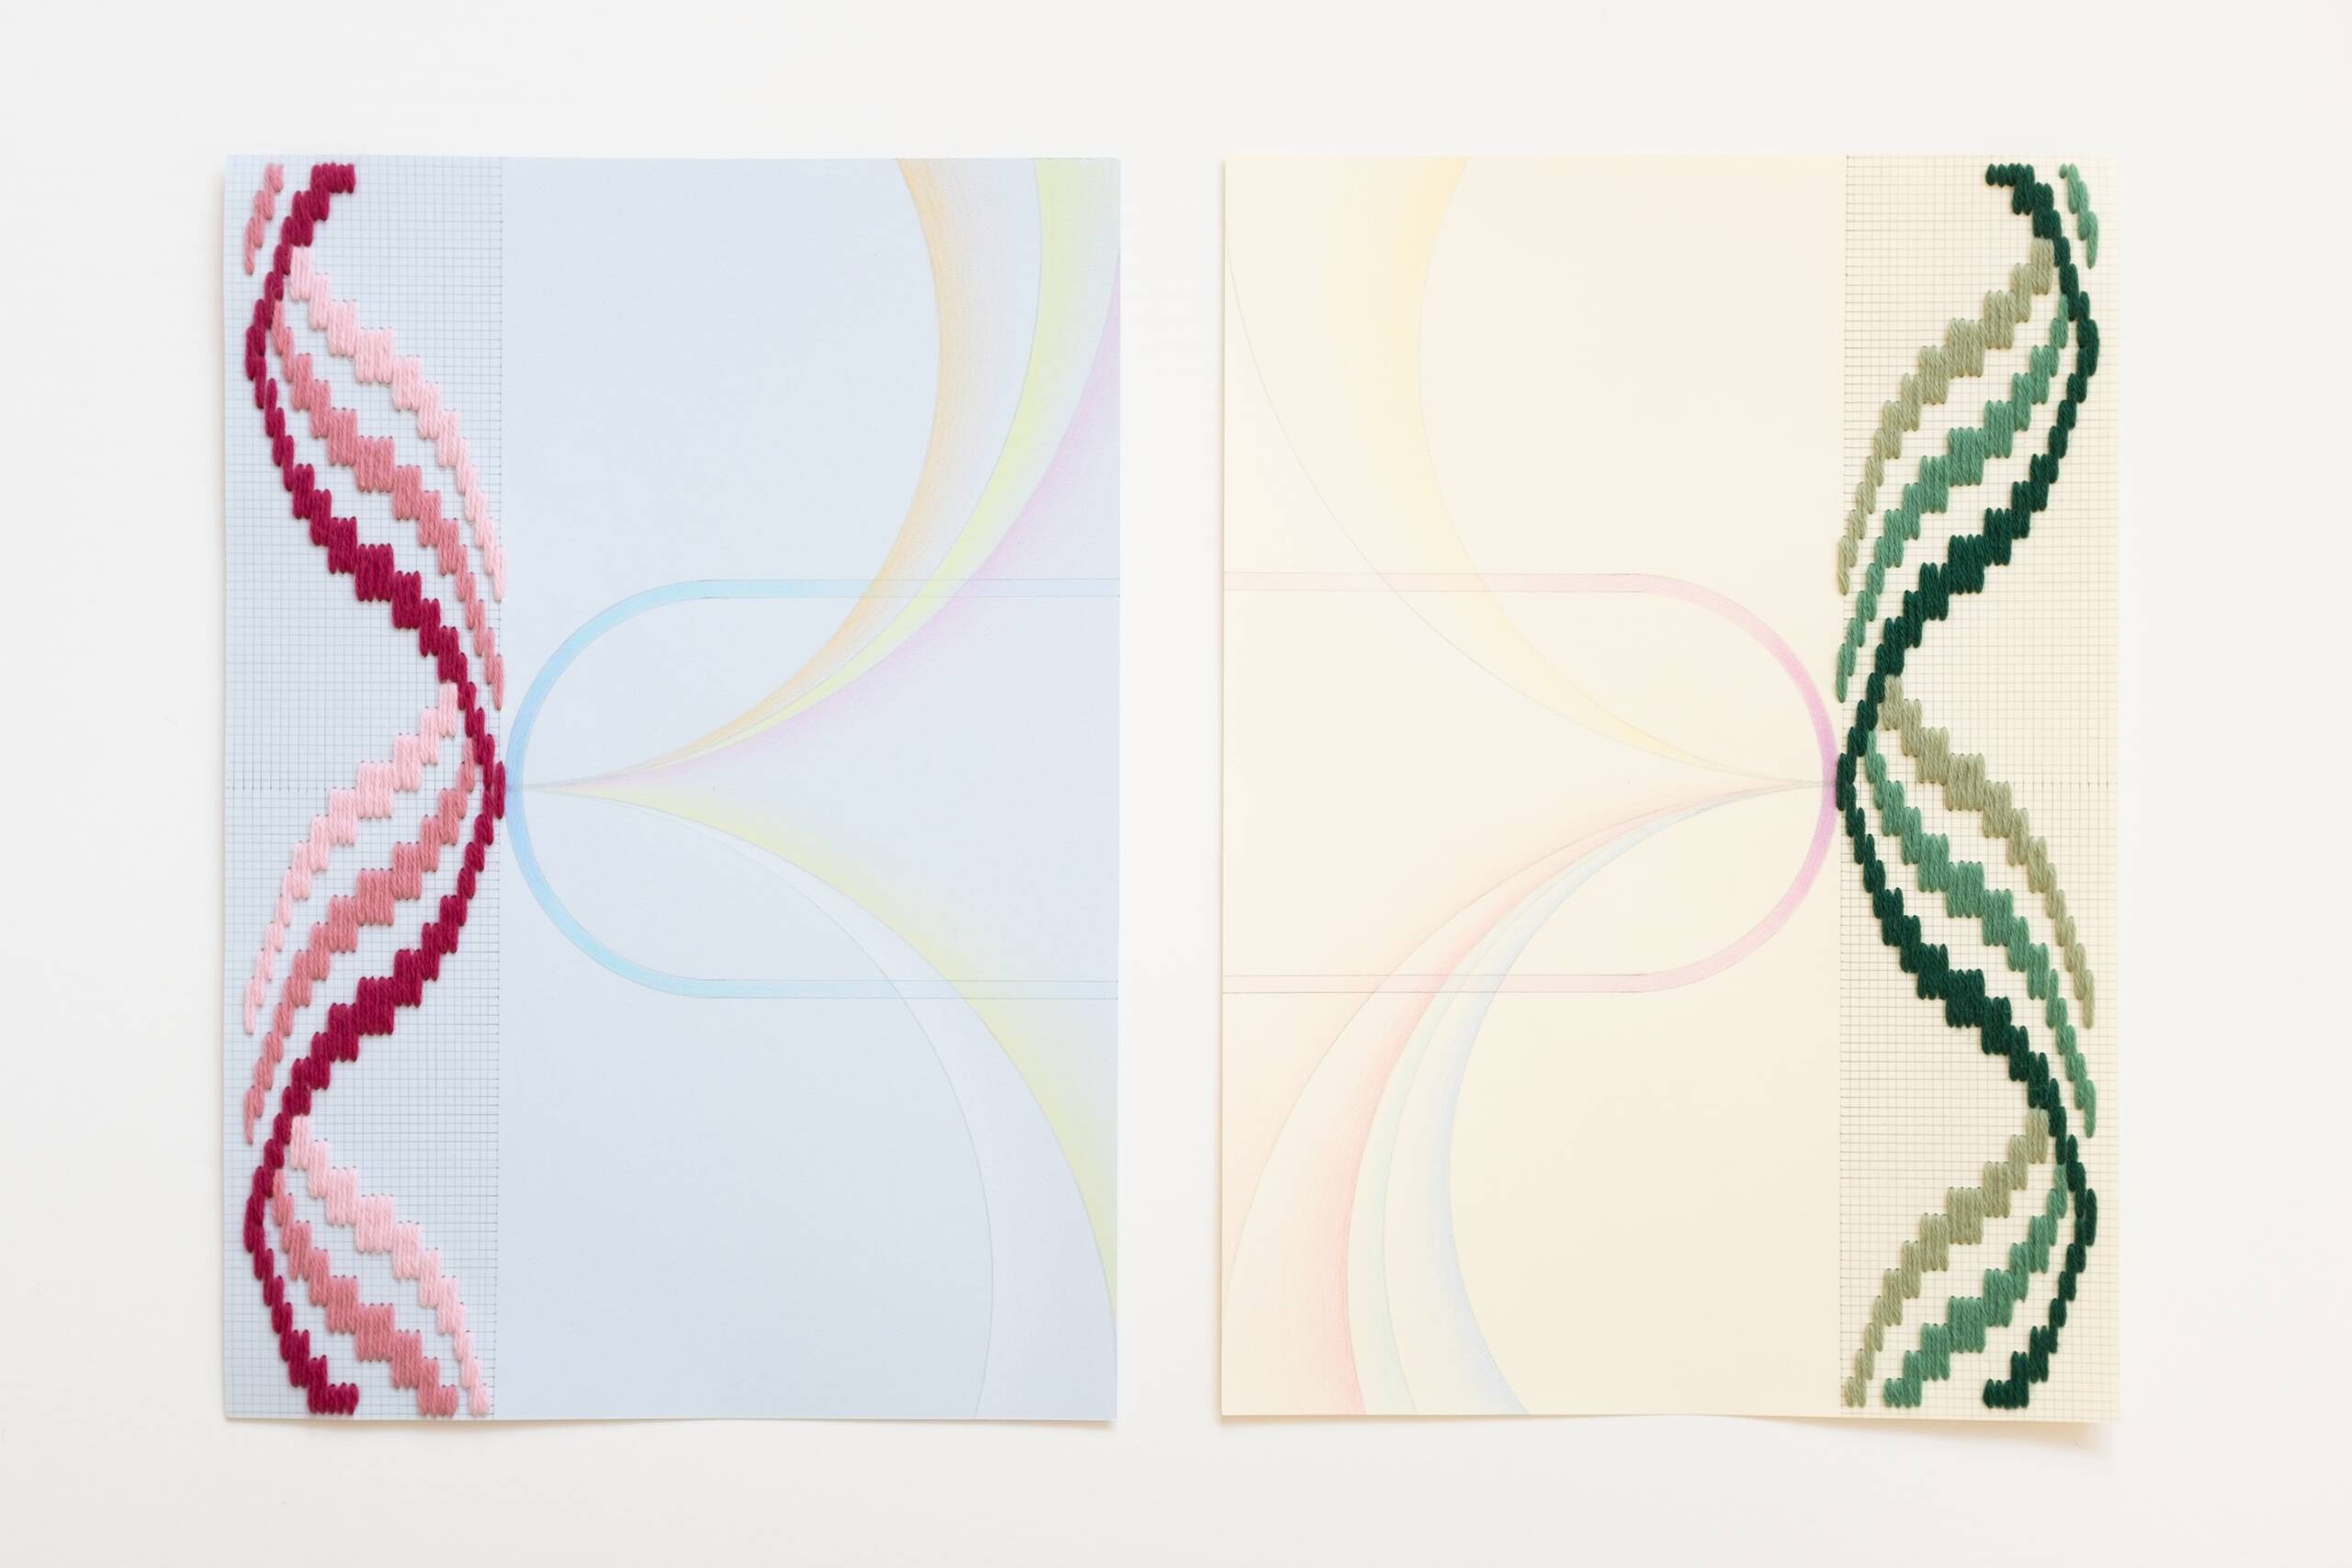 Bargello rectangles [pink on blue and green on yellow] (diptych), Hand-embroidered wool yarn, pencil and colored pencil on 170 gsm paper, 2021